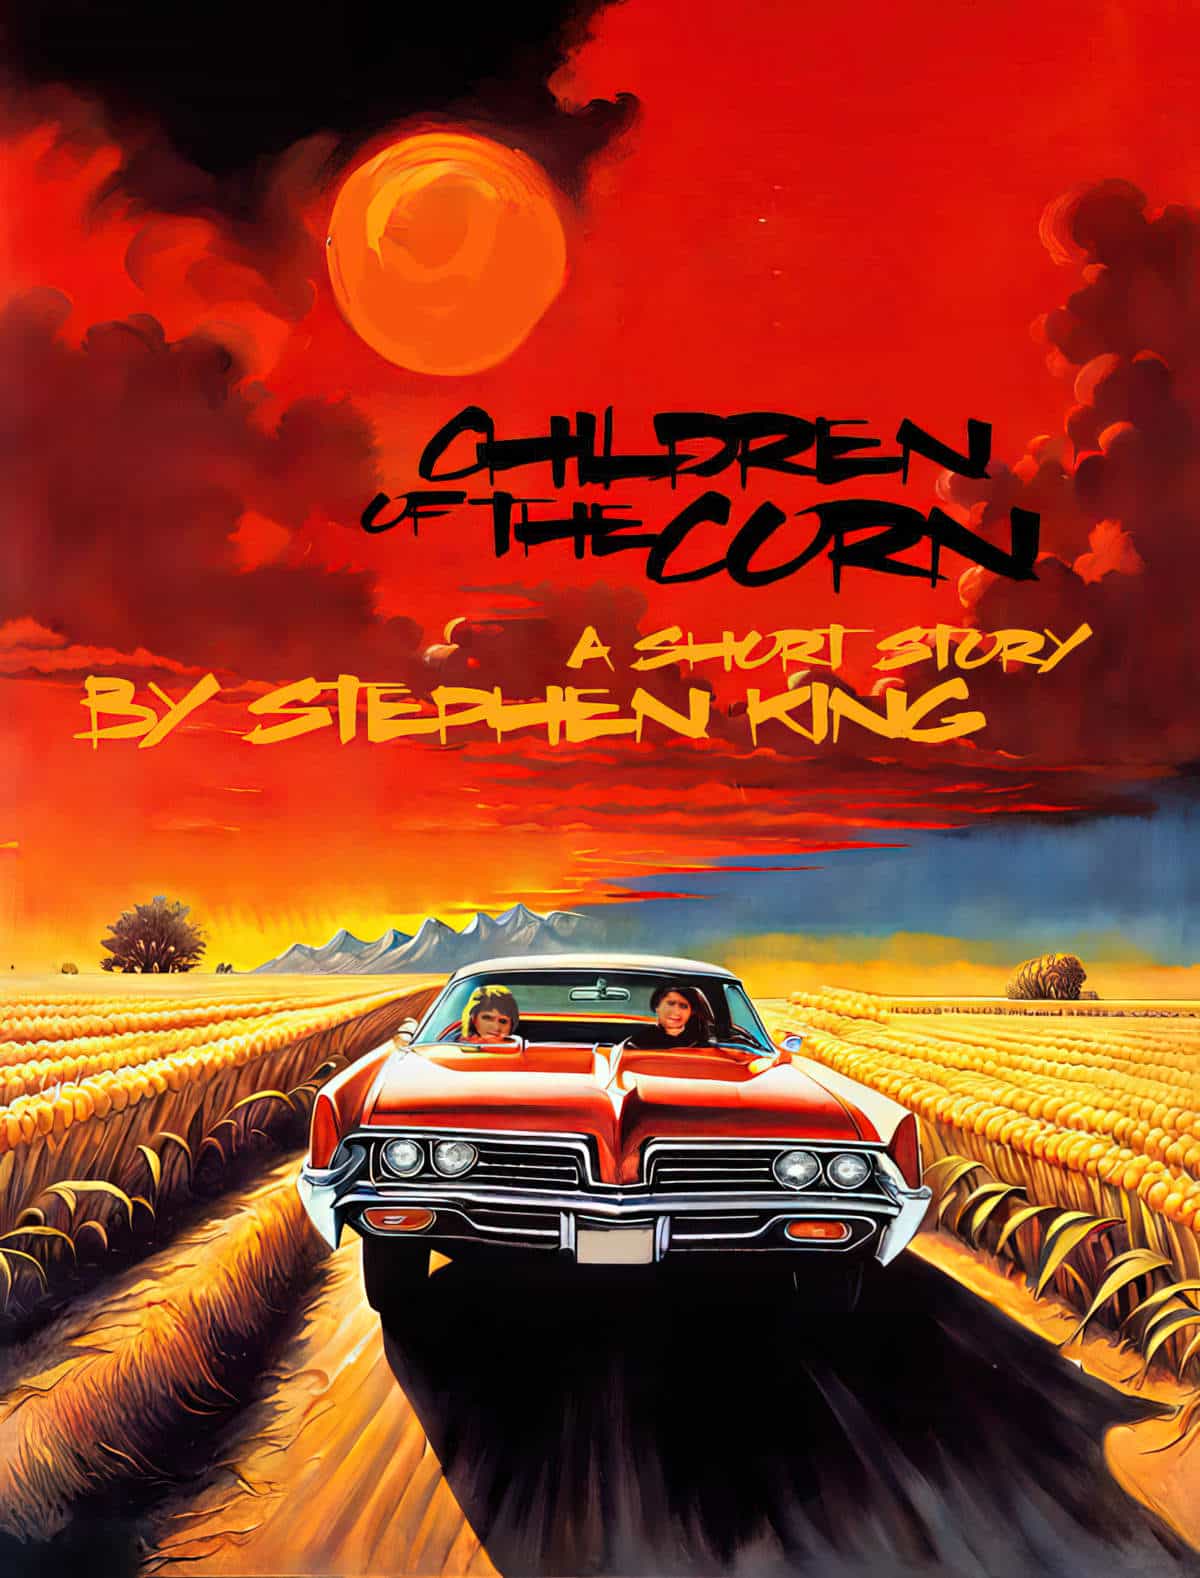 Children of the Corn by Stephen King Short Story Analysis